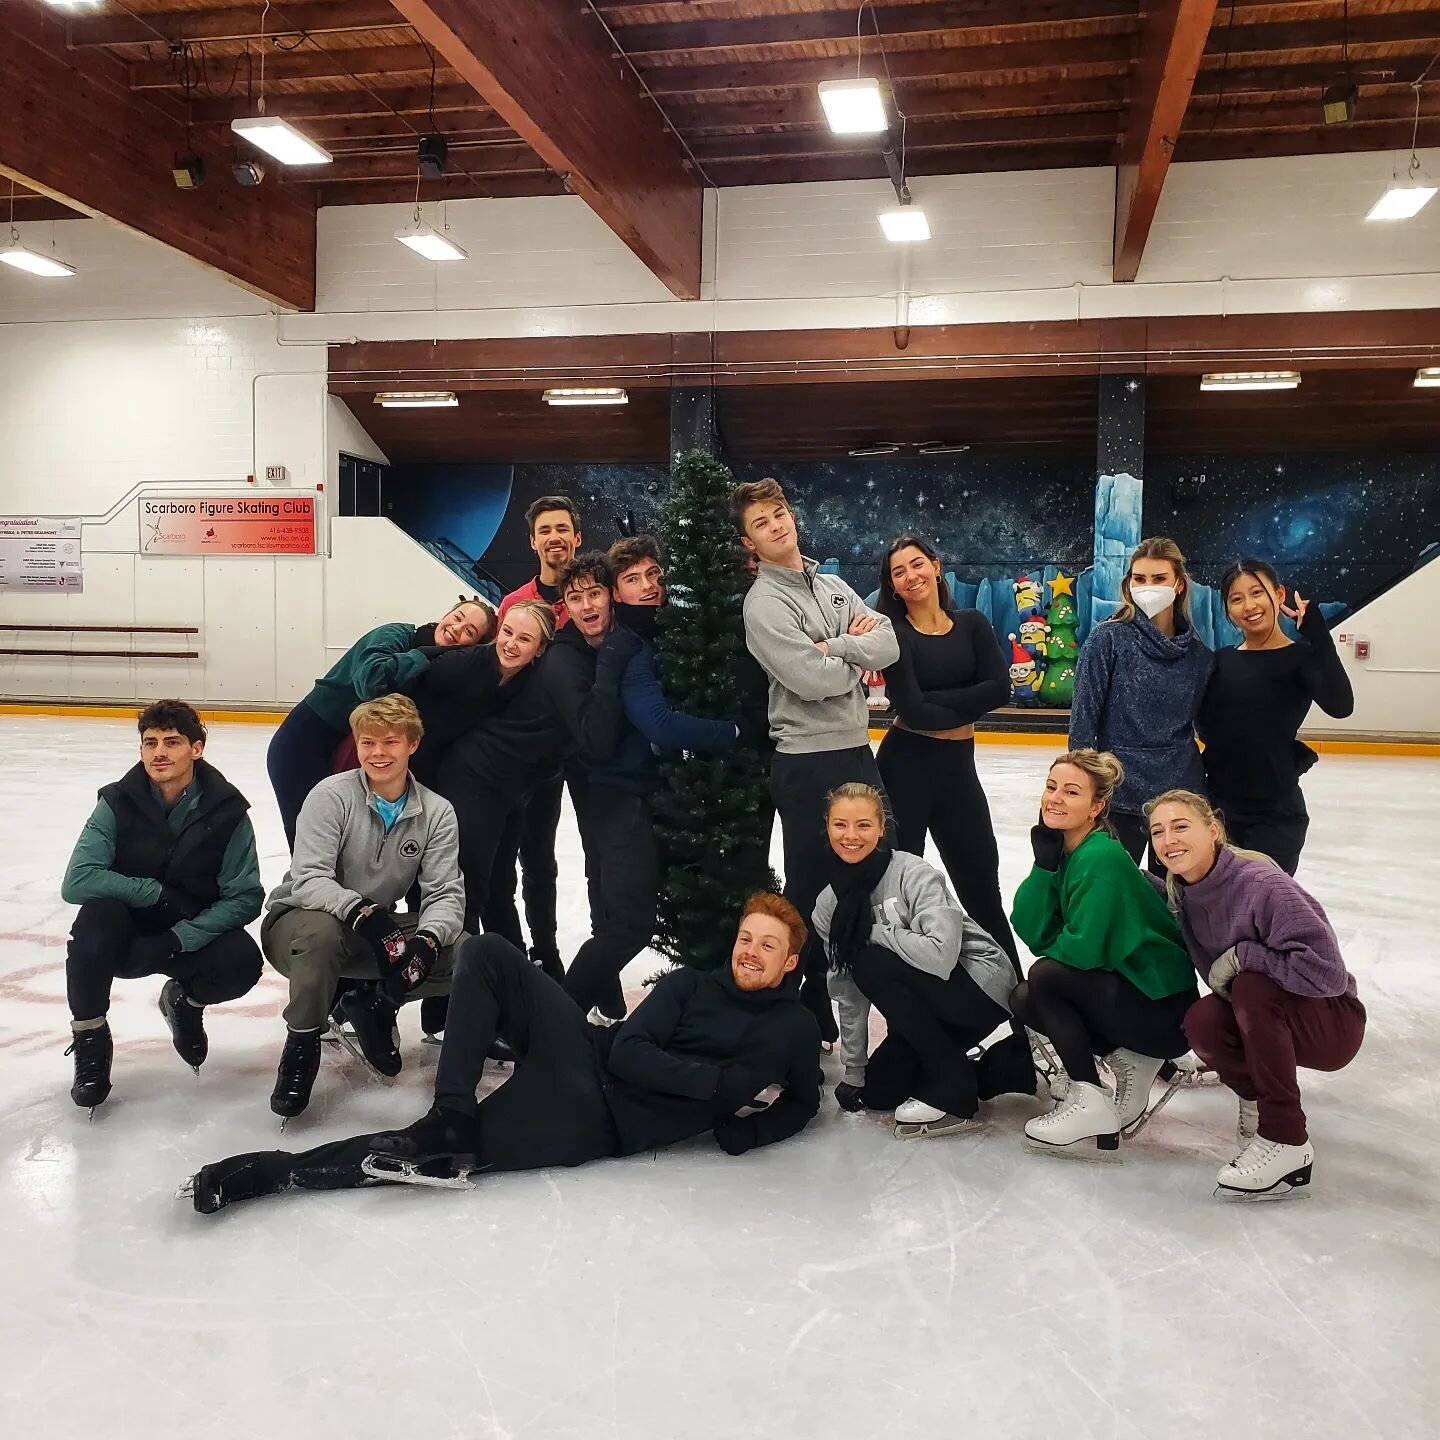 Merry Christmas &amp; Happy Holidays from our Junior and Senior Ice Dance teams! We hope everyone has a wonderful holiday break. We look forward to showing you our programs at Canadians and Europeans!
🎄🎅🤶🎁

#skating #figureskating #icedance #chri